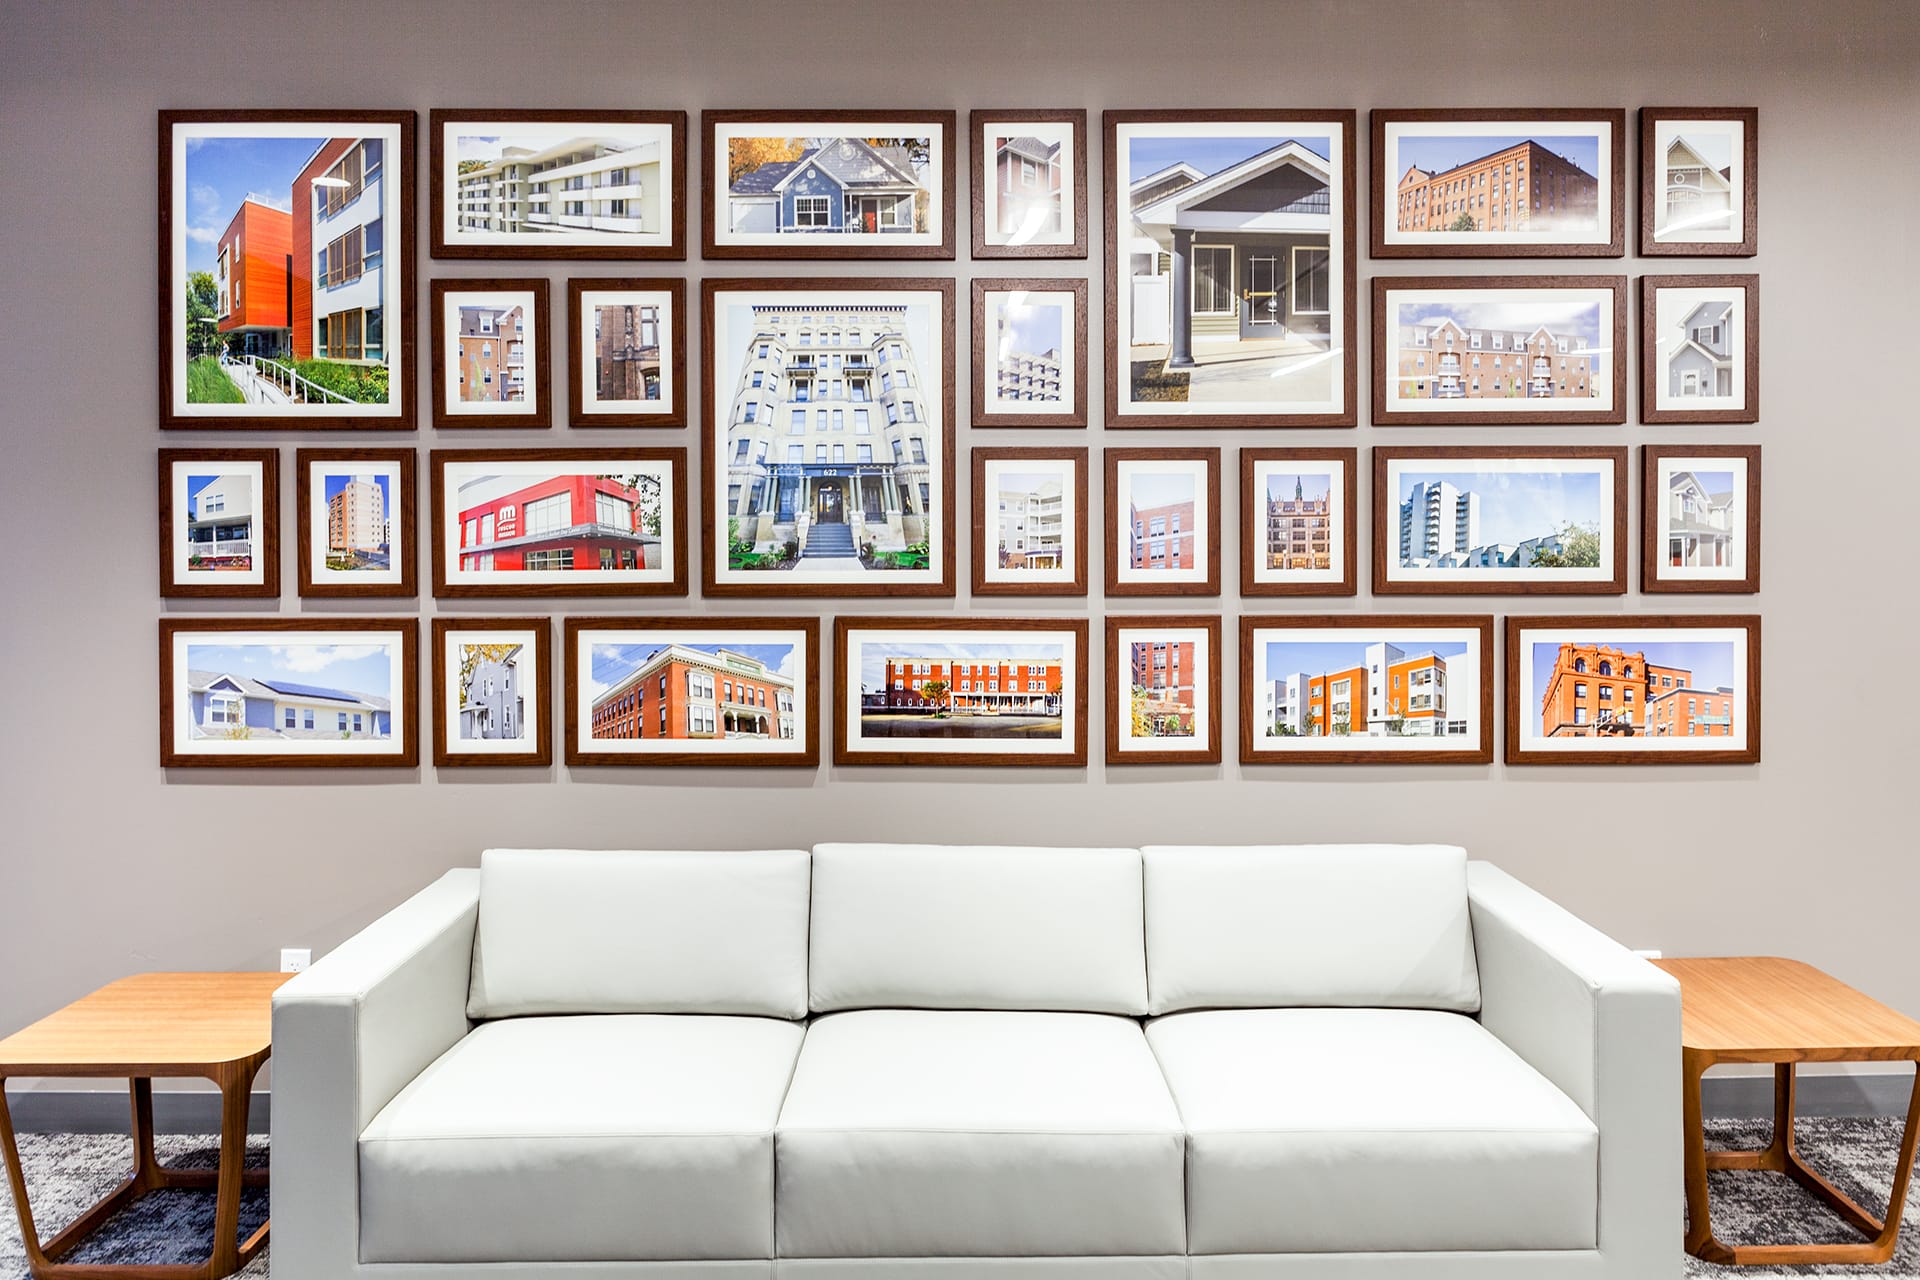 An installation of framed images of banks at the Federal Home Loan Bank of New York